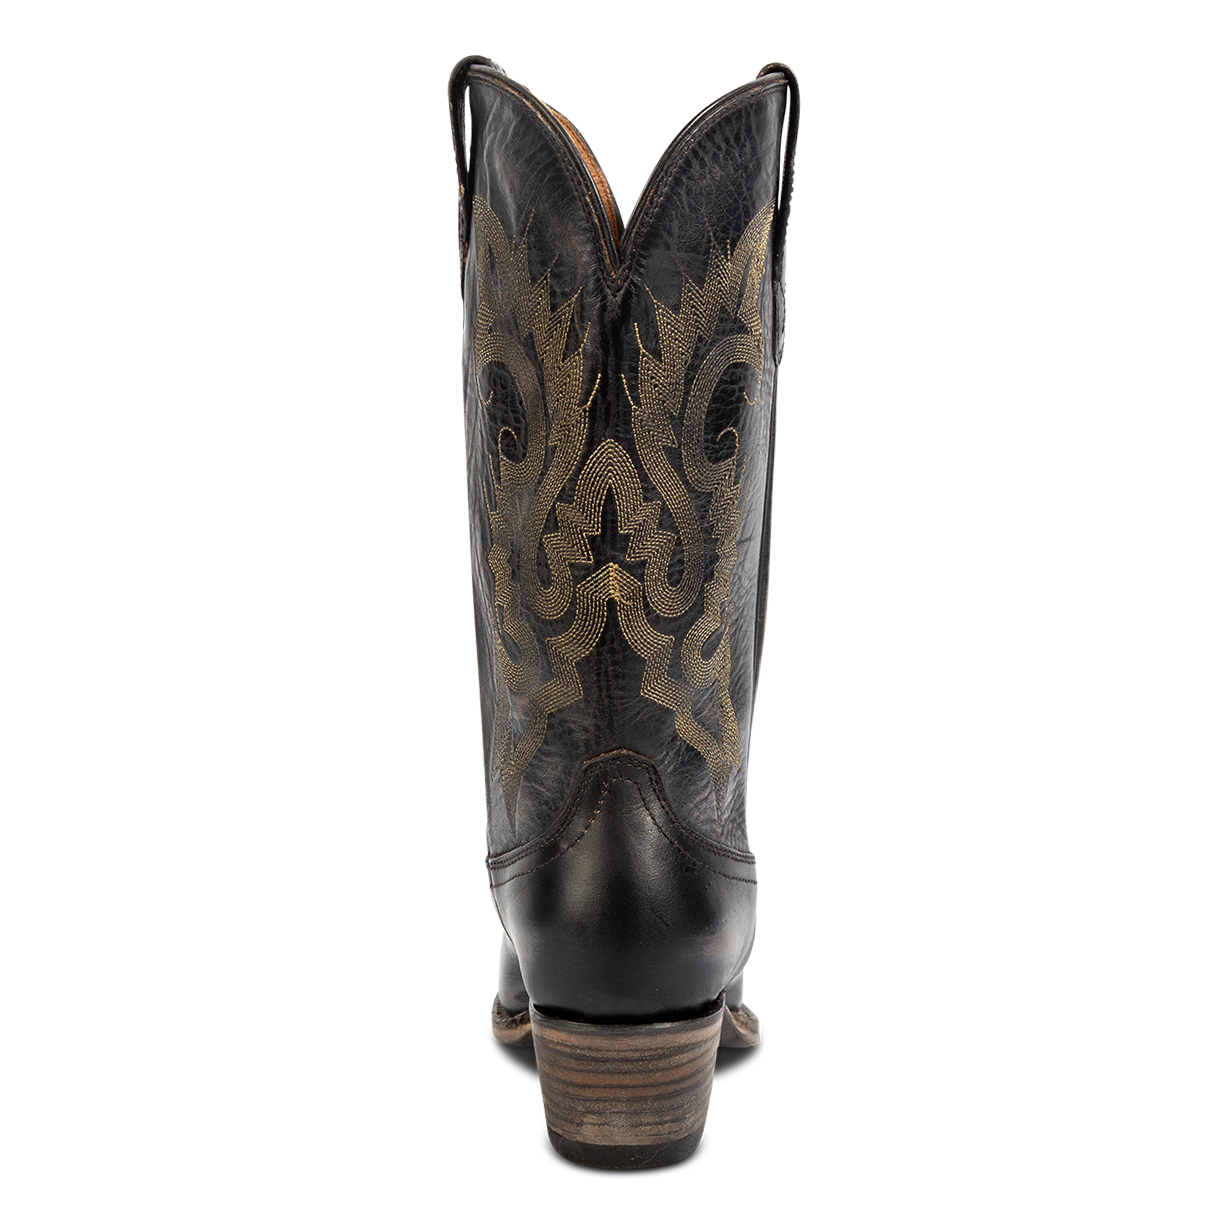 Back view showing FREEBIRD women's Woody black leather boot with stitch detailing and low slanted heel